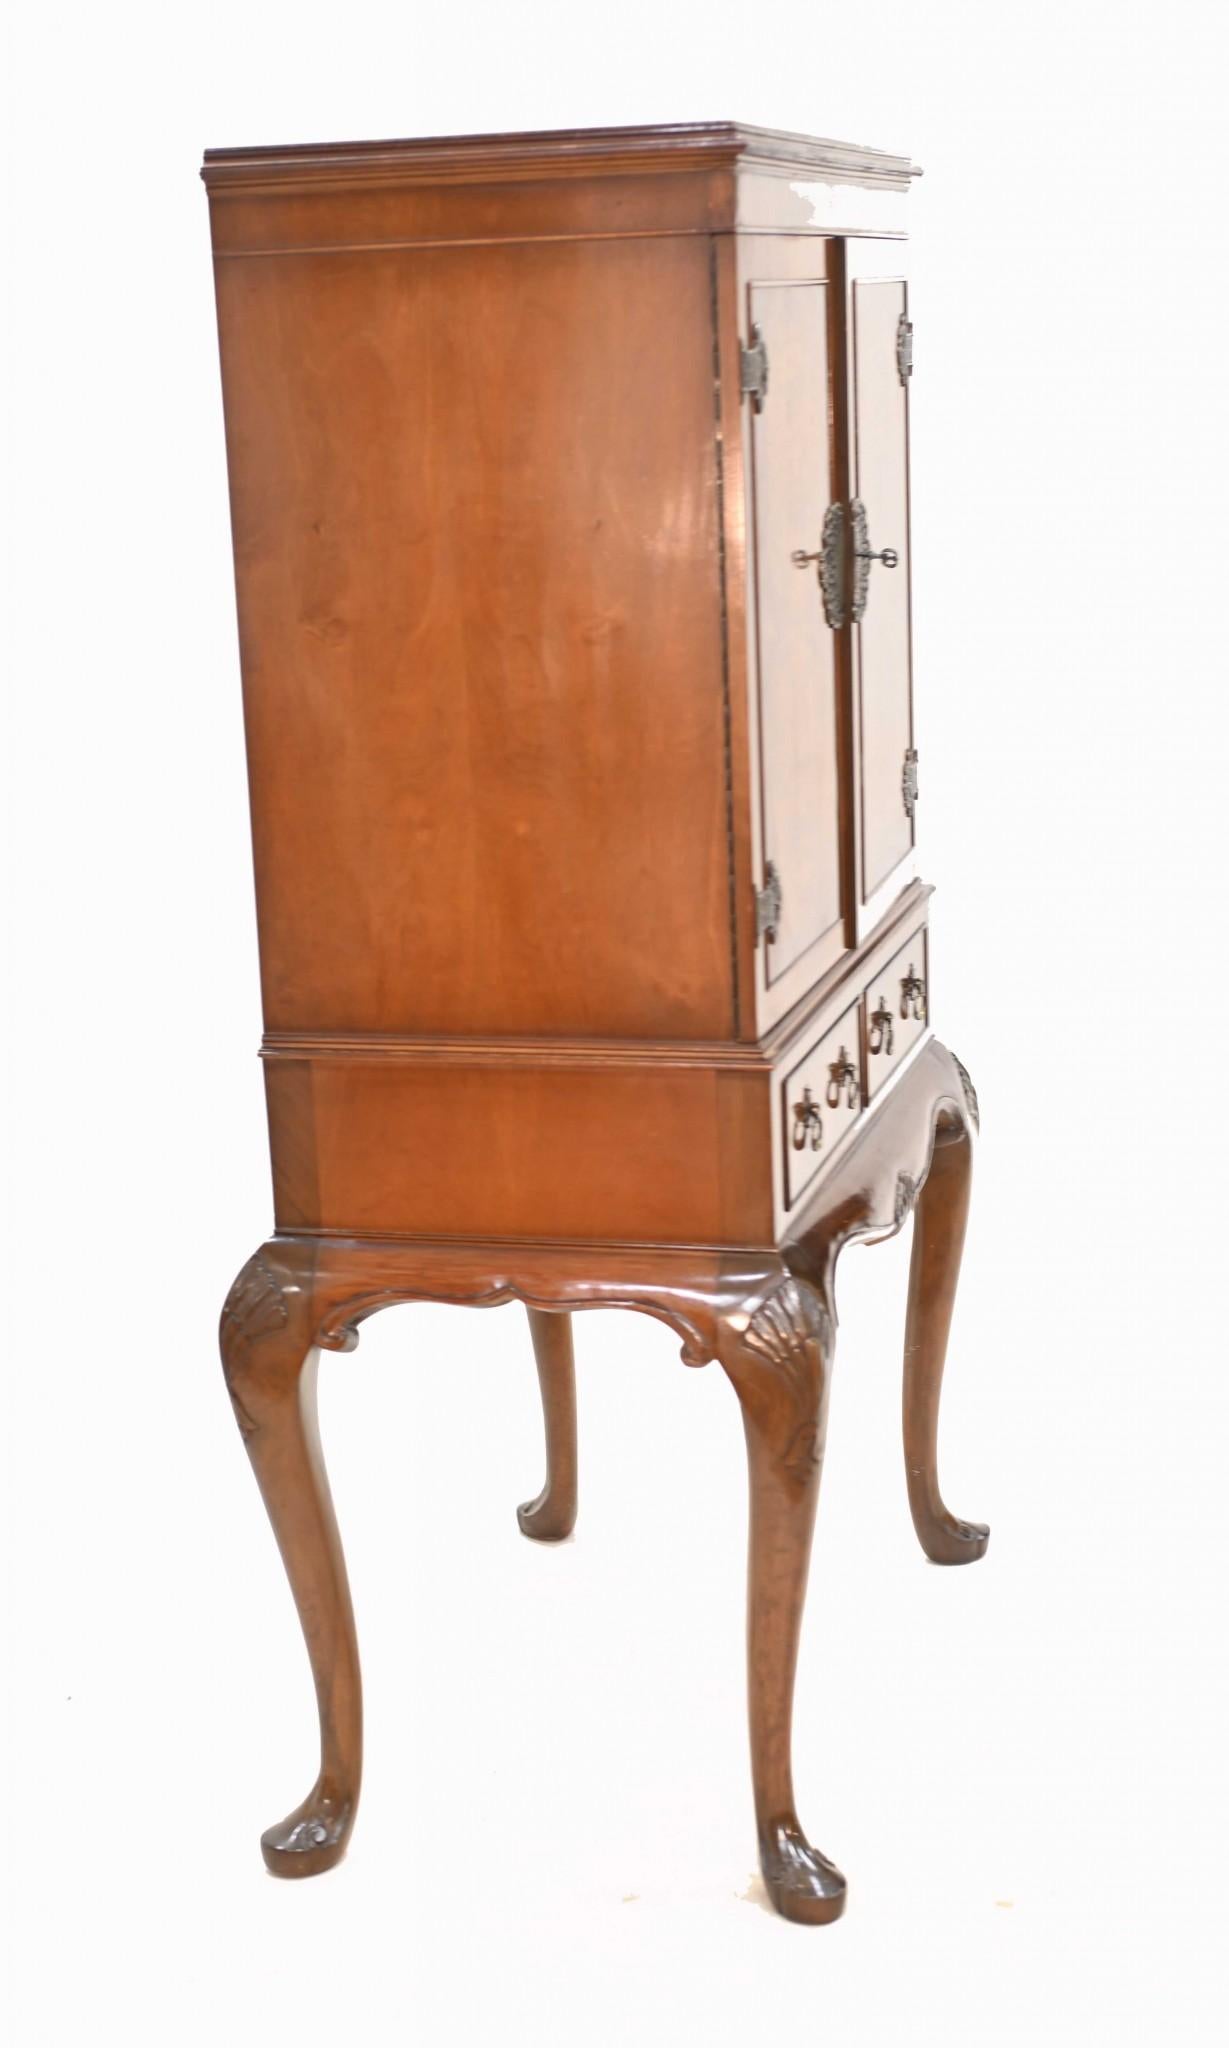 Art Deco Drinks Cabinet 1930 Epstein and Co Furniture For Sale 7